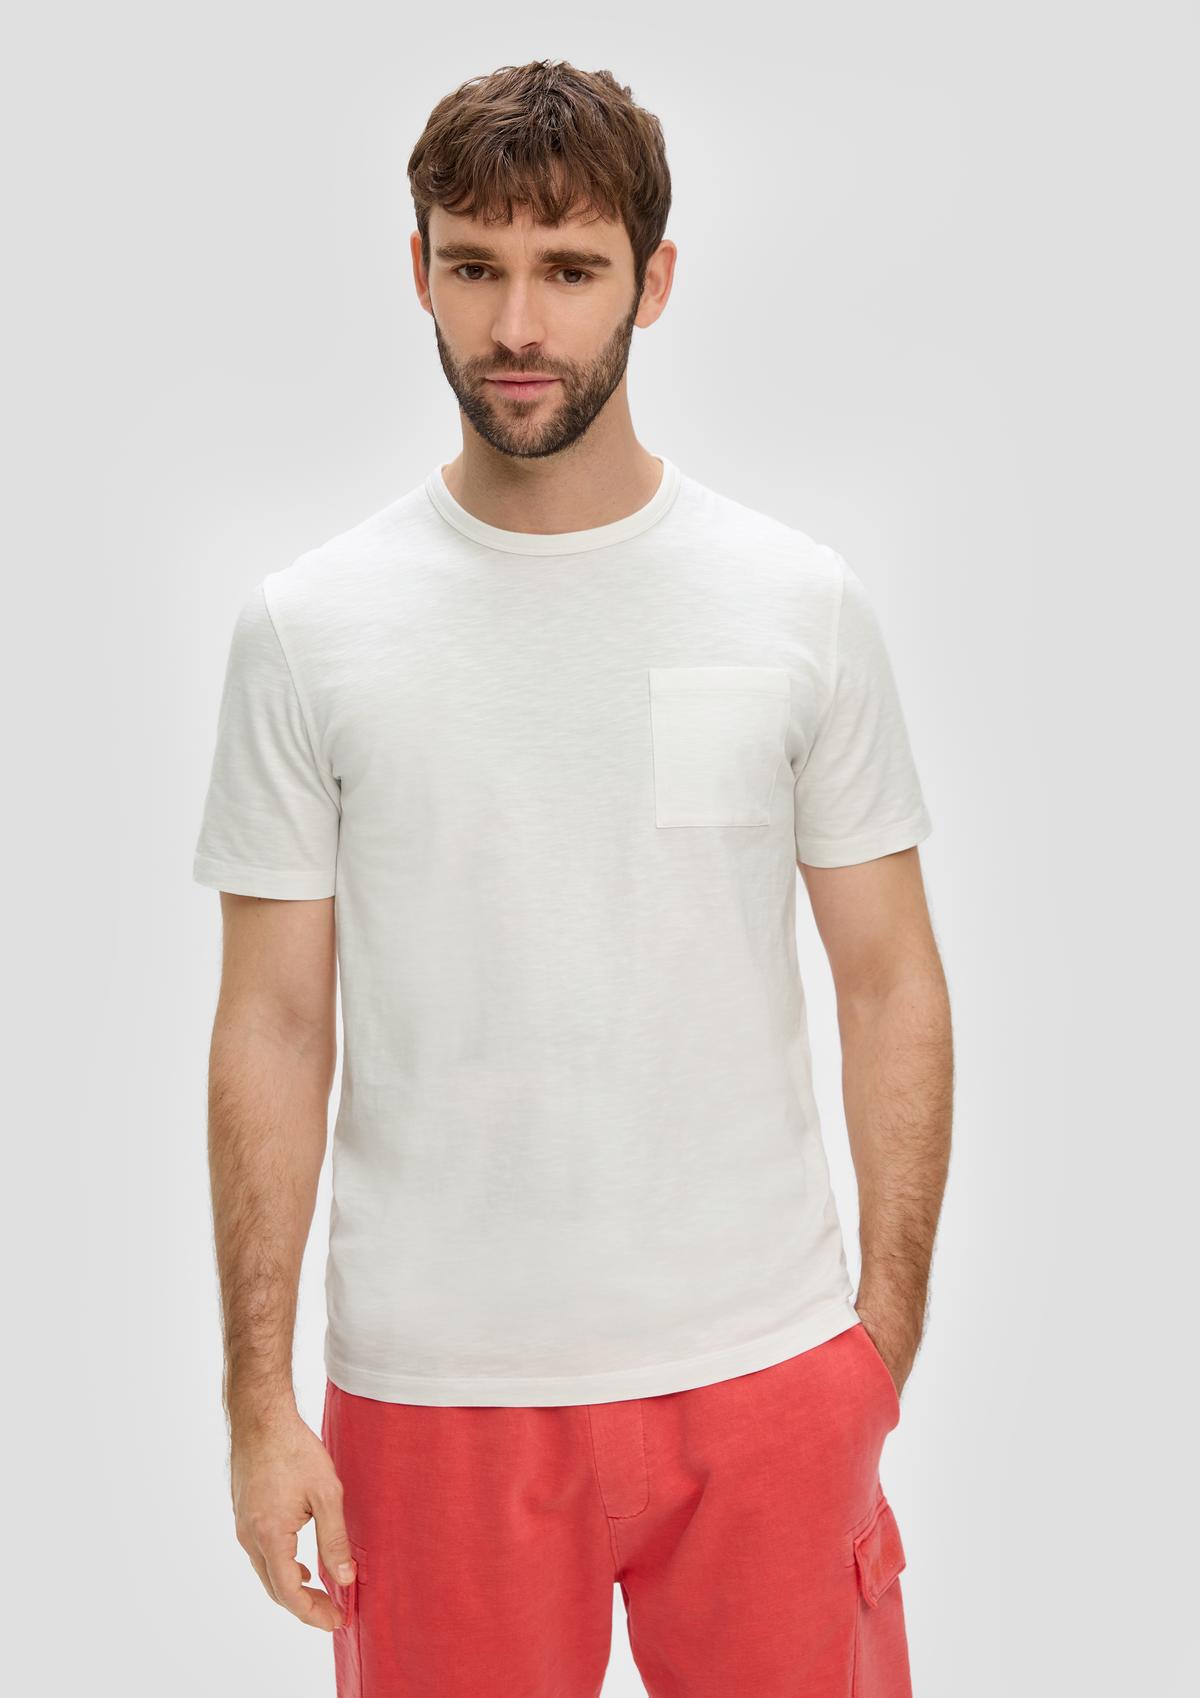 T-shirt with a breast pocket